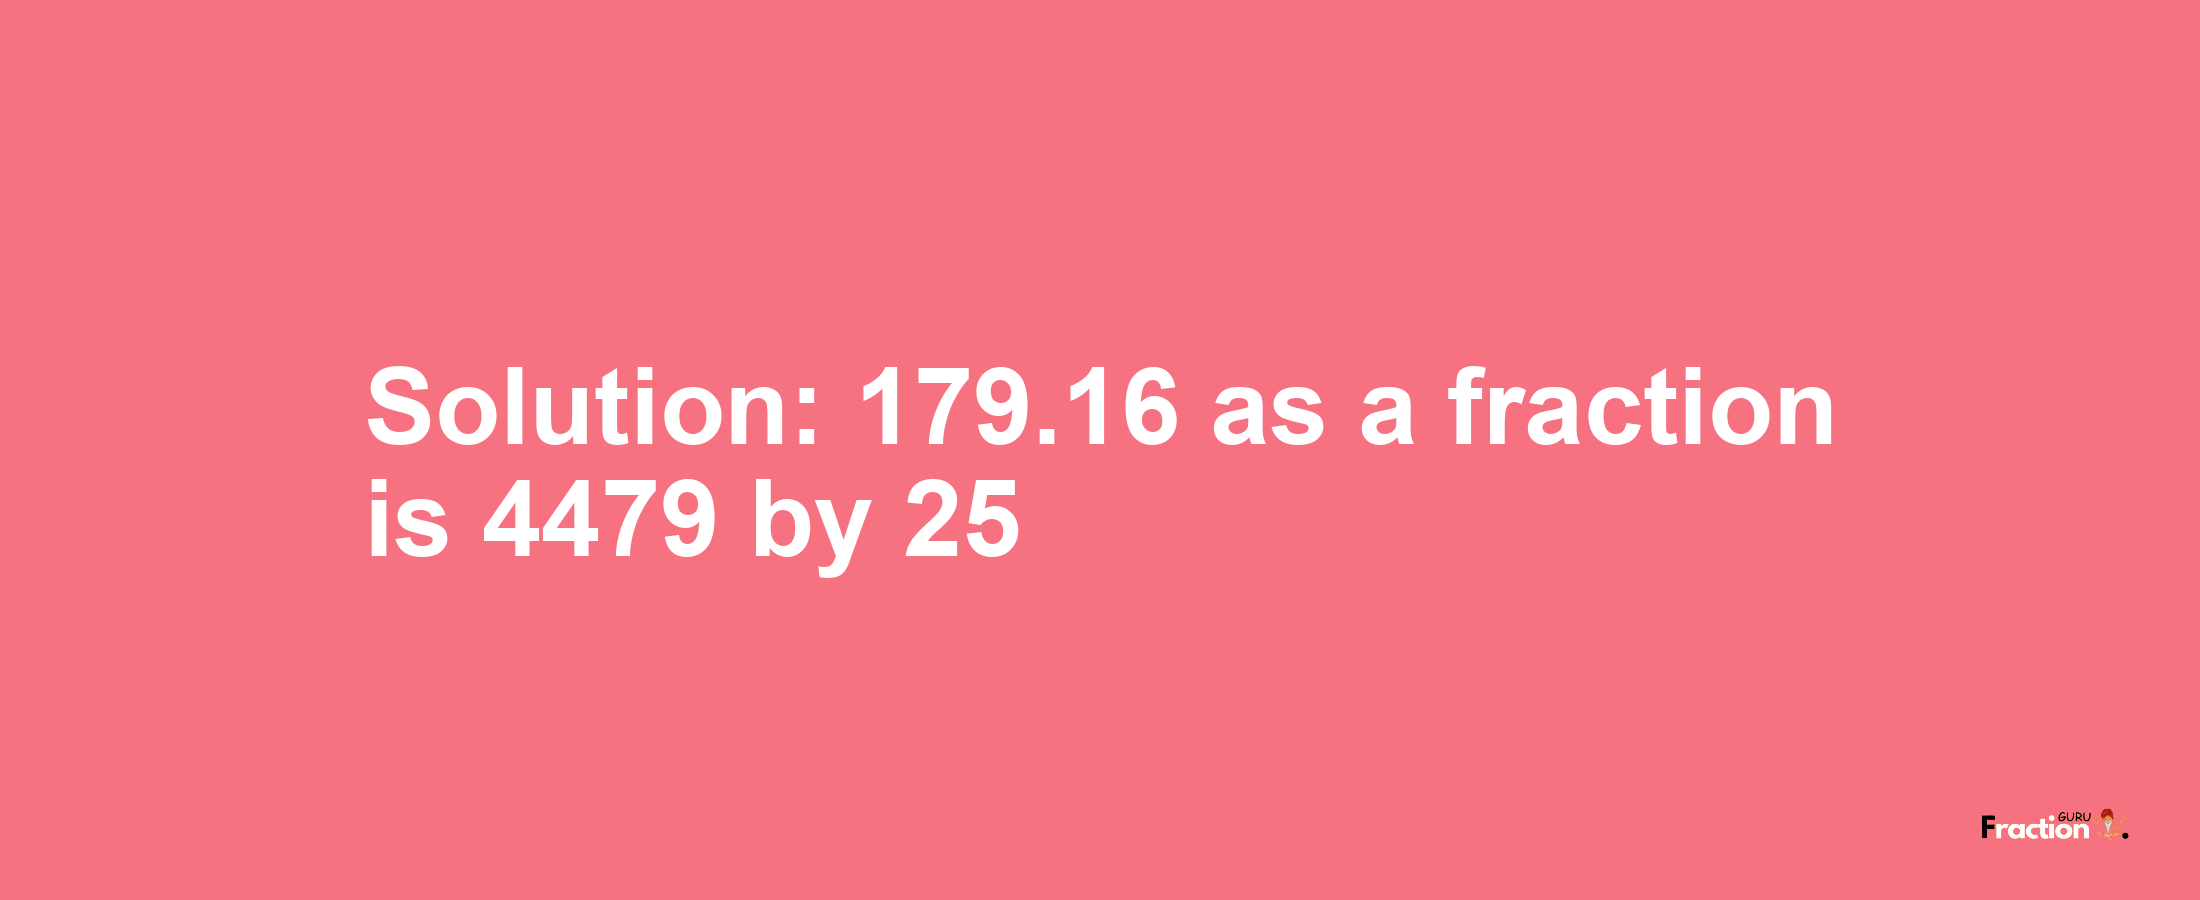 Solution:179.16 as a fraction is 4479/25